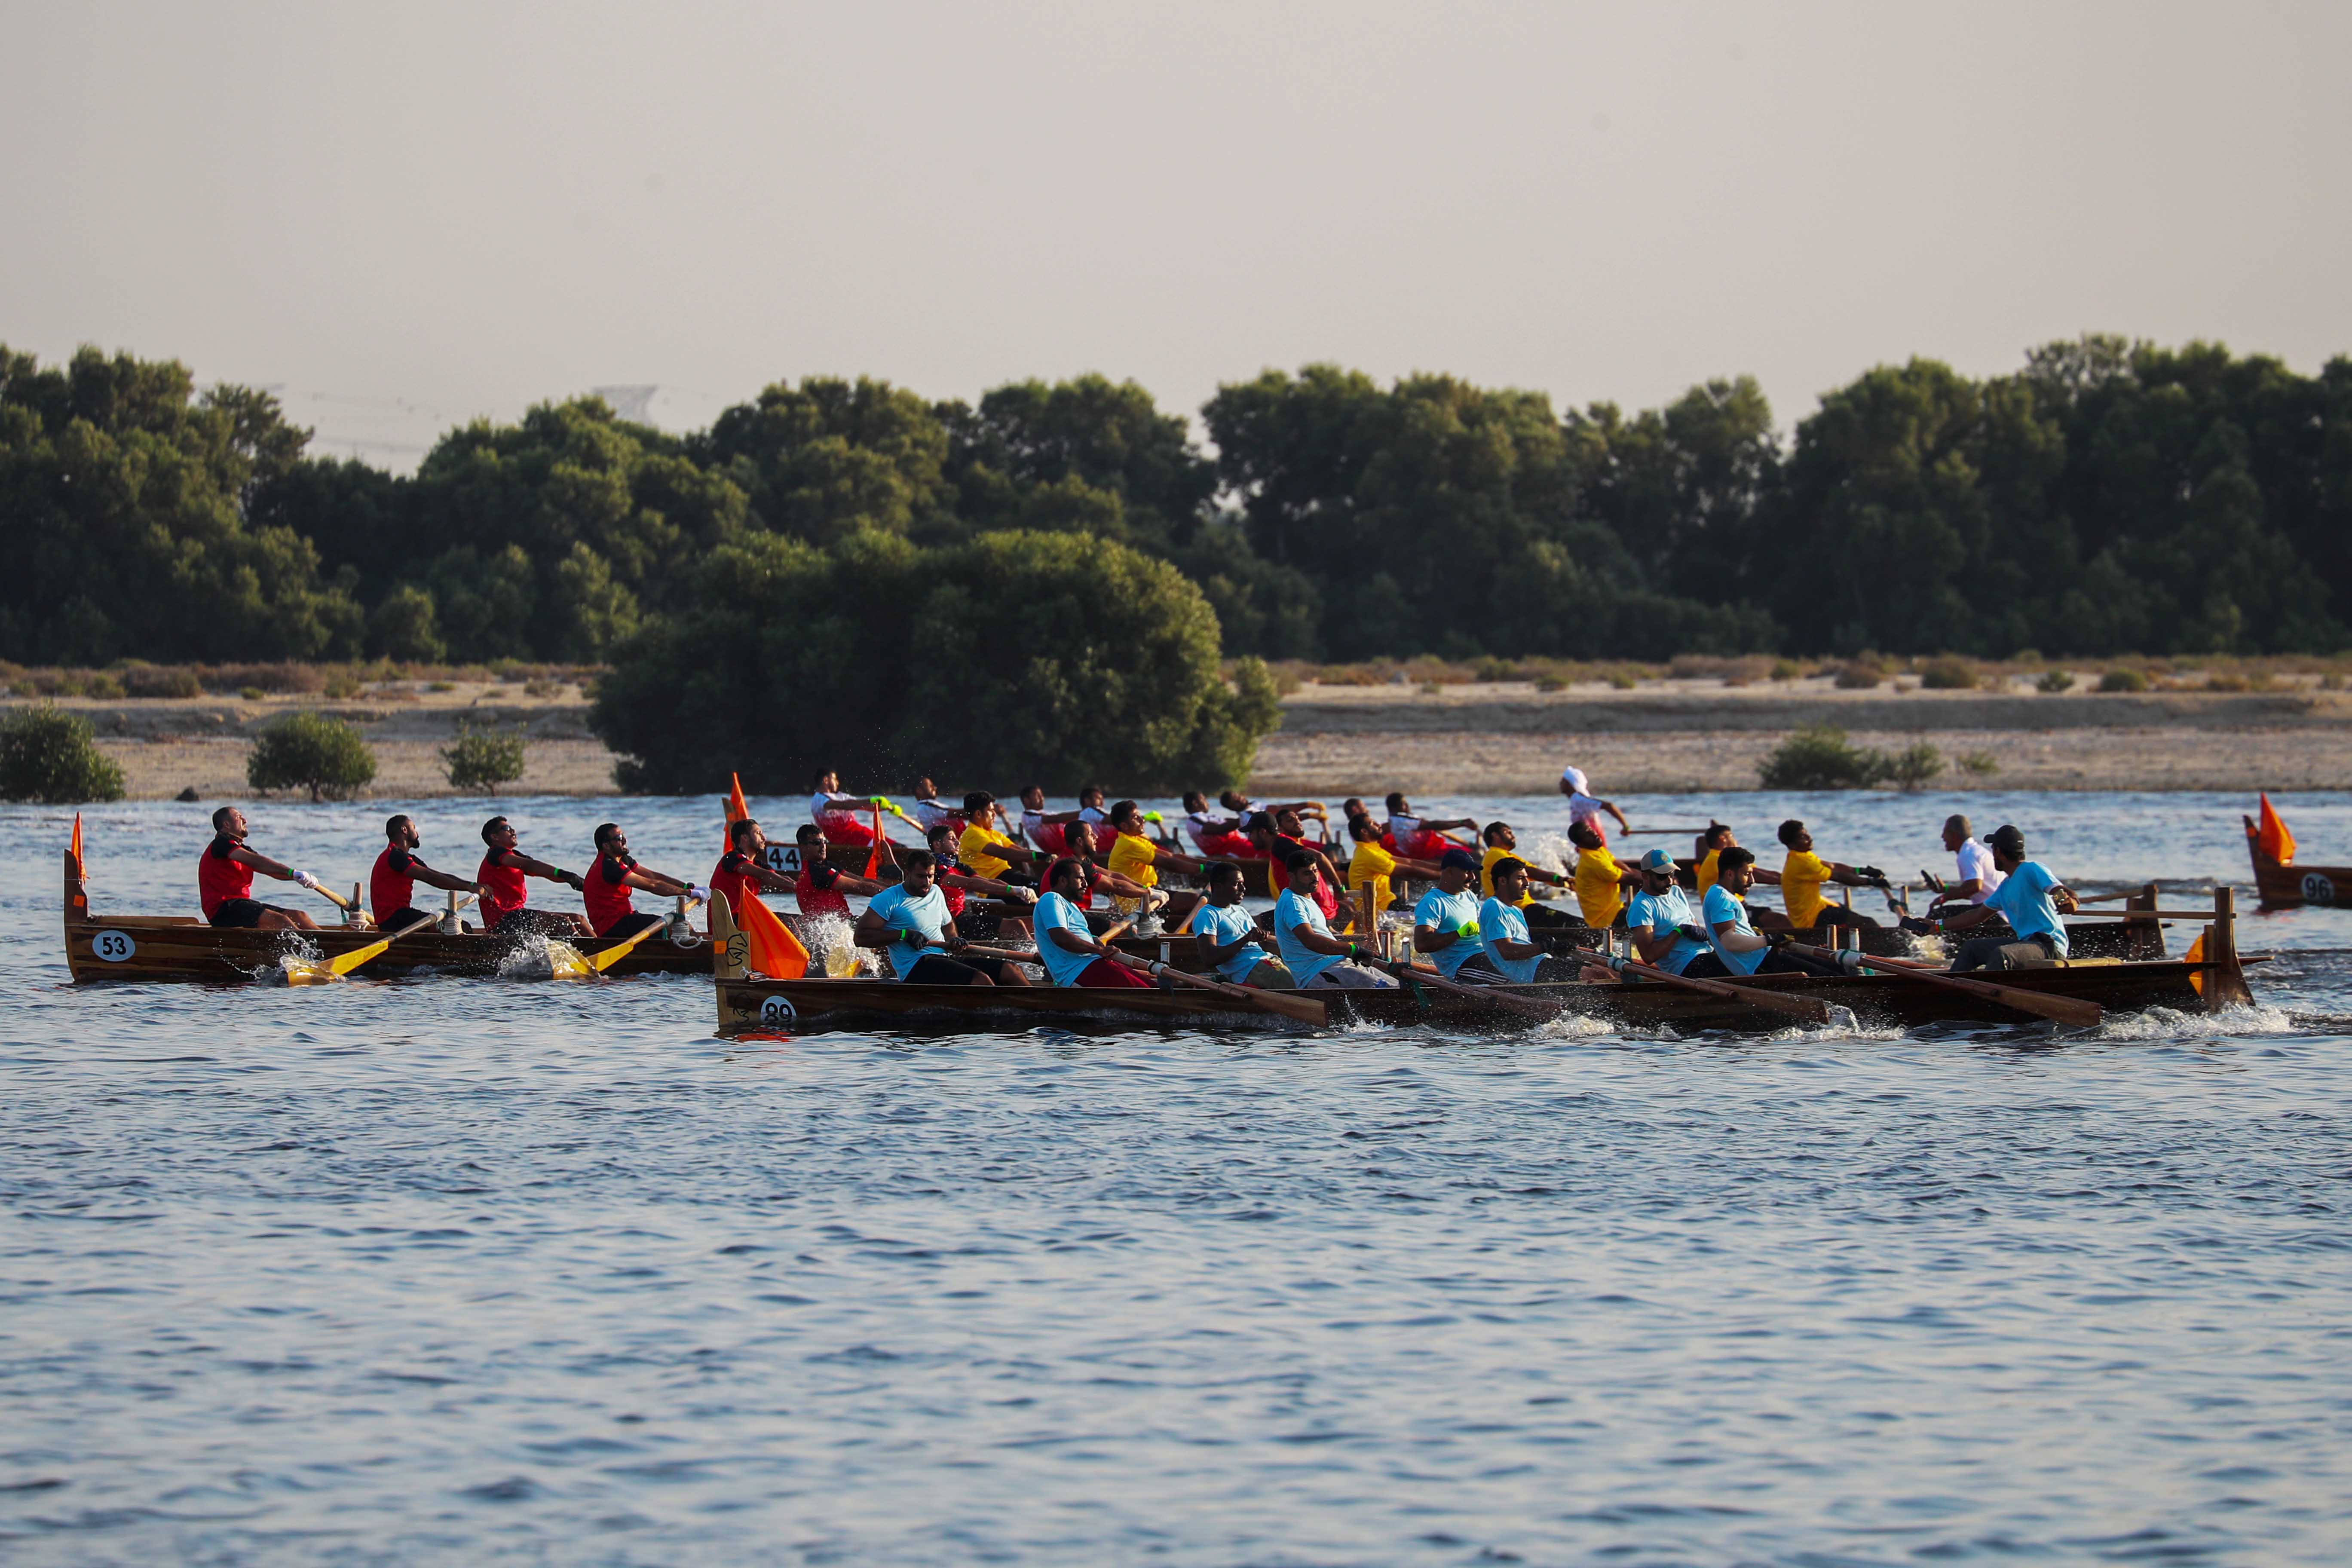 30 Boats to Compete in the 26th Al Maktoum Cup Traditional Rowing Race